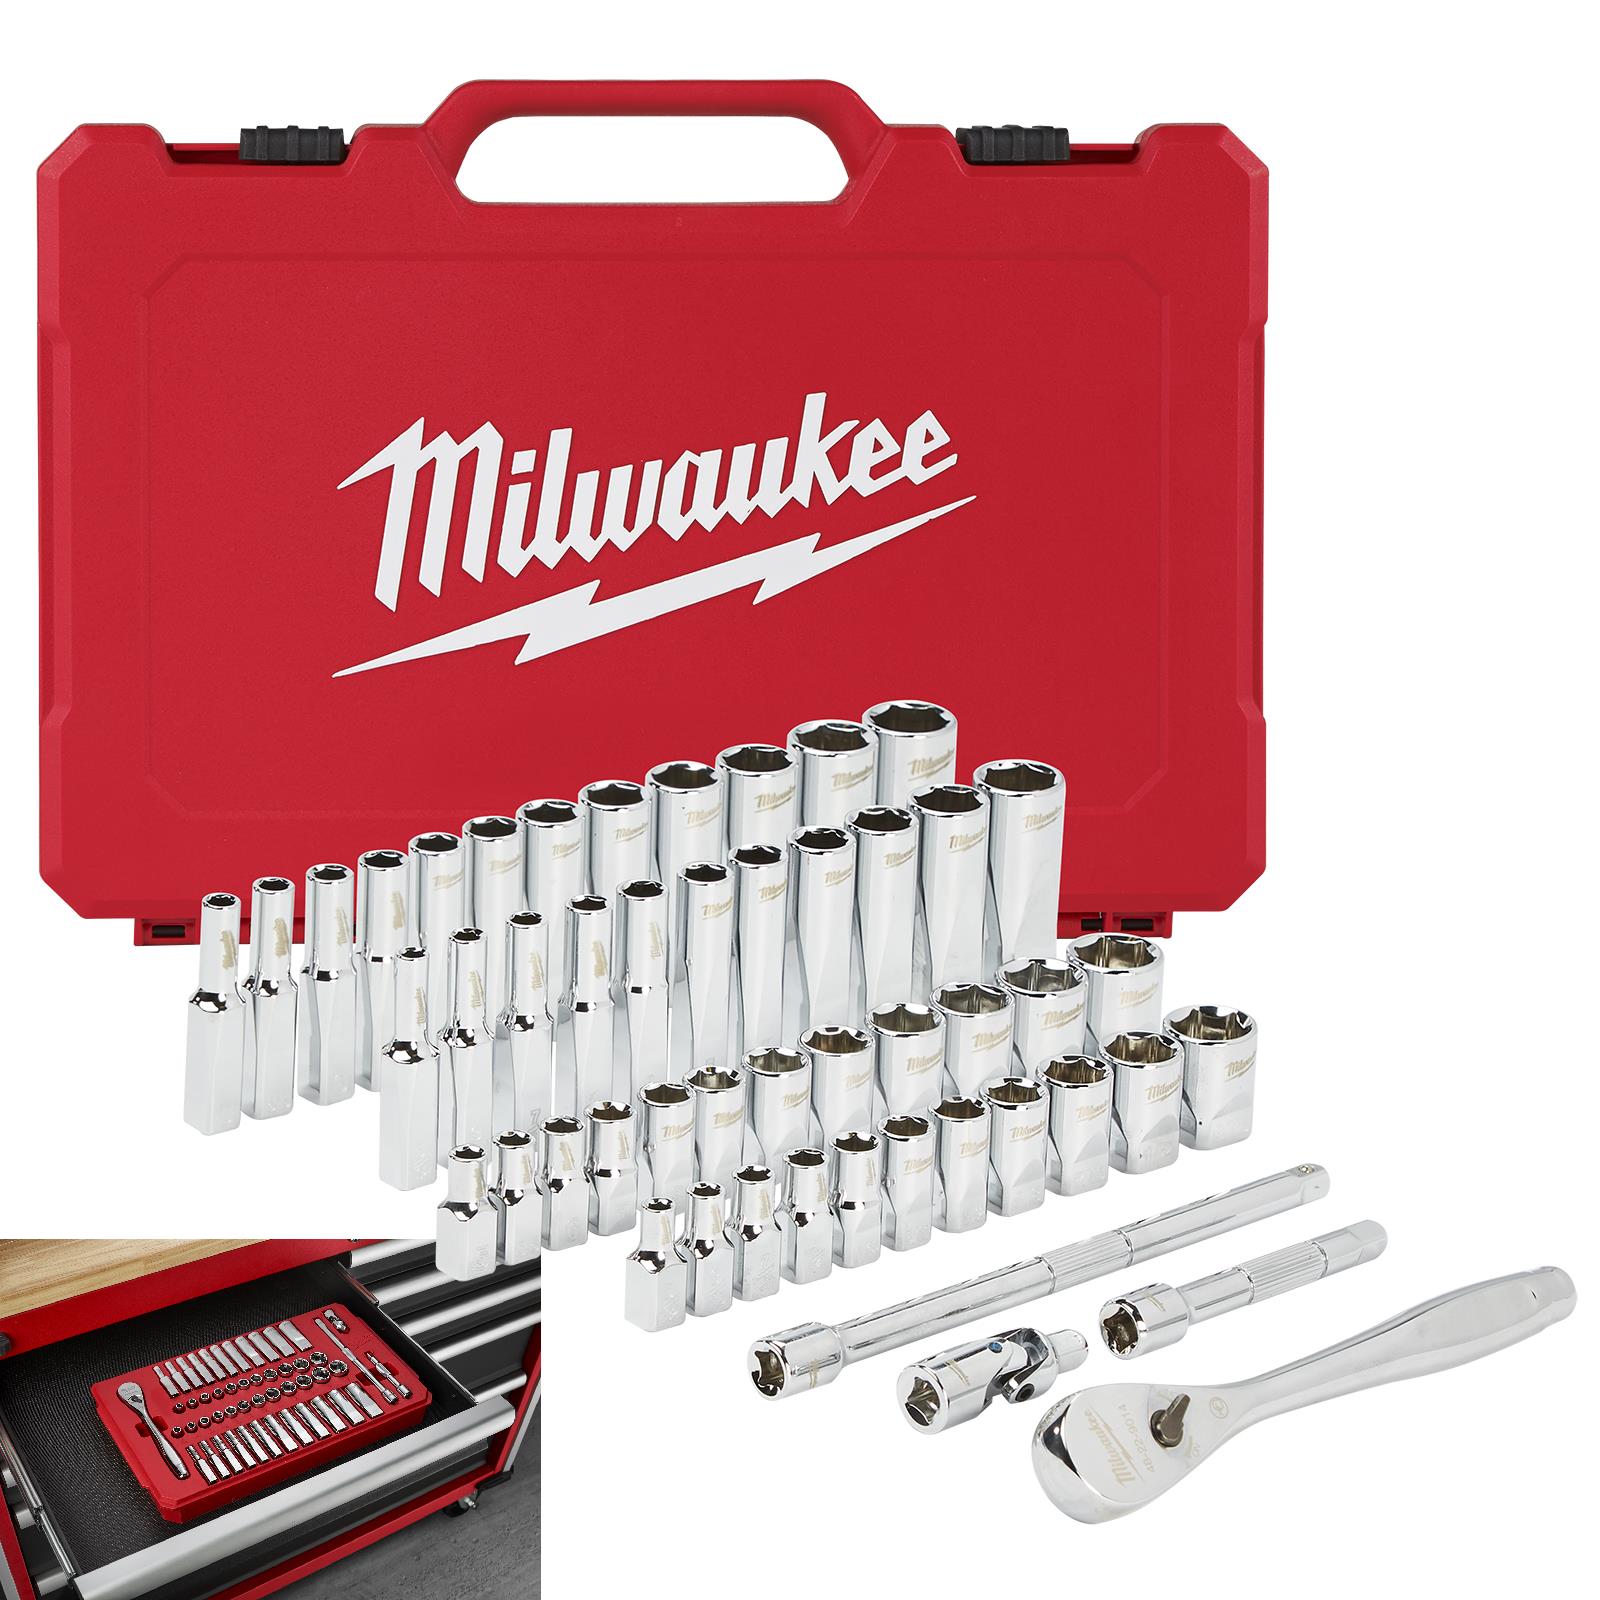 Milwaukee Ratchet and Socket Set 1/4" Drive 50 Piece Metric and Imperial